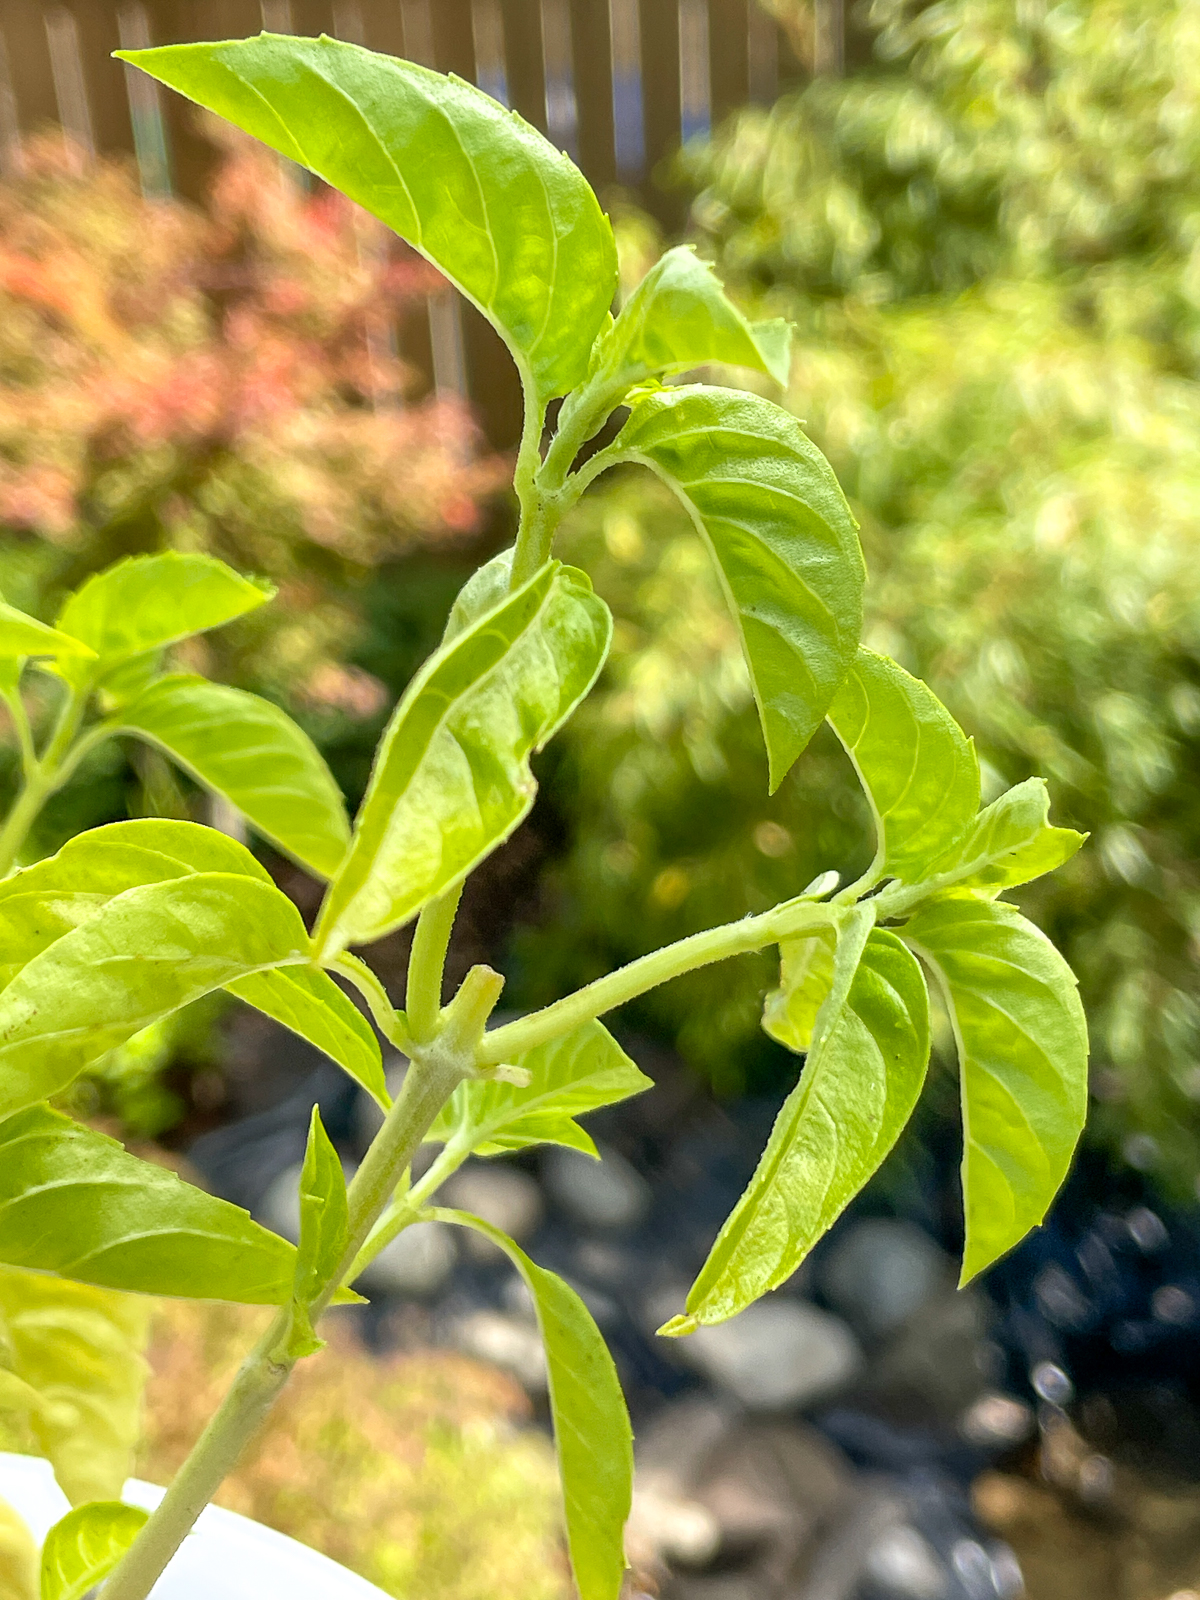 cut basil stem created two branches with more leaves